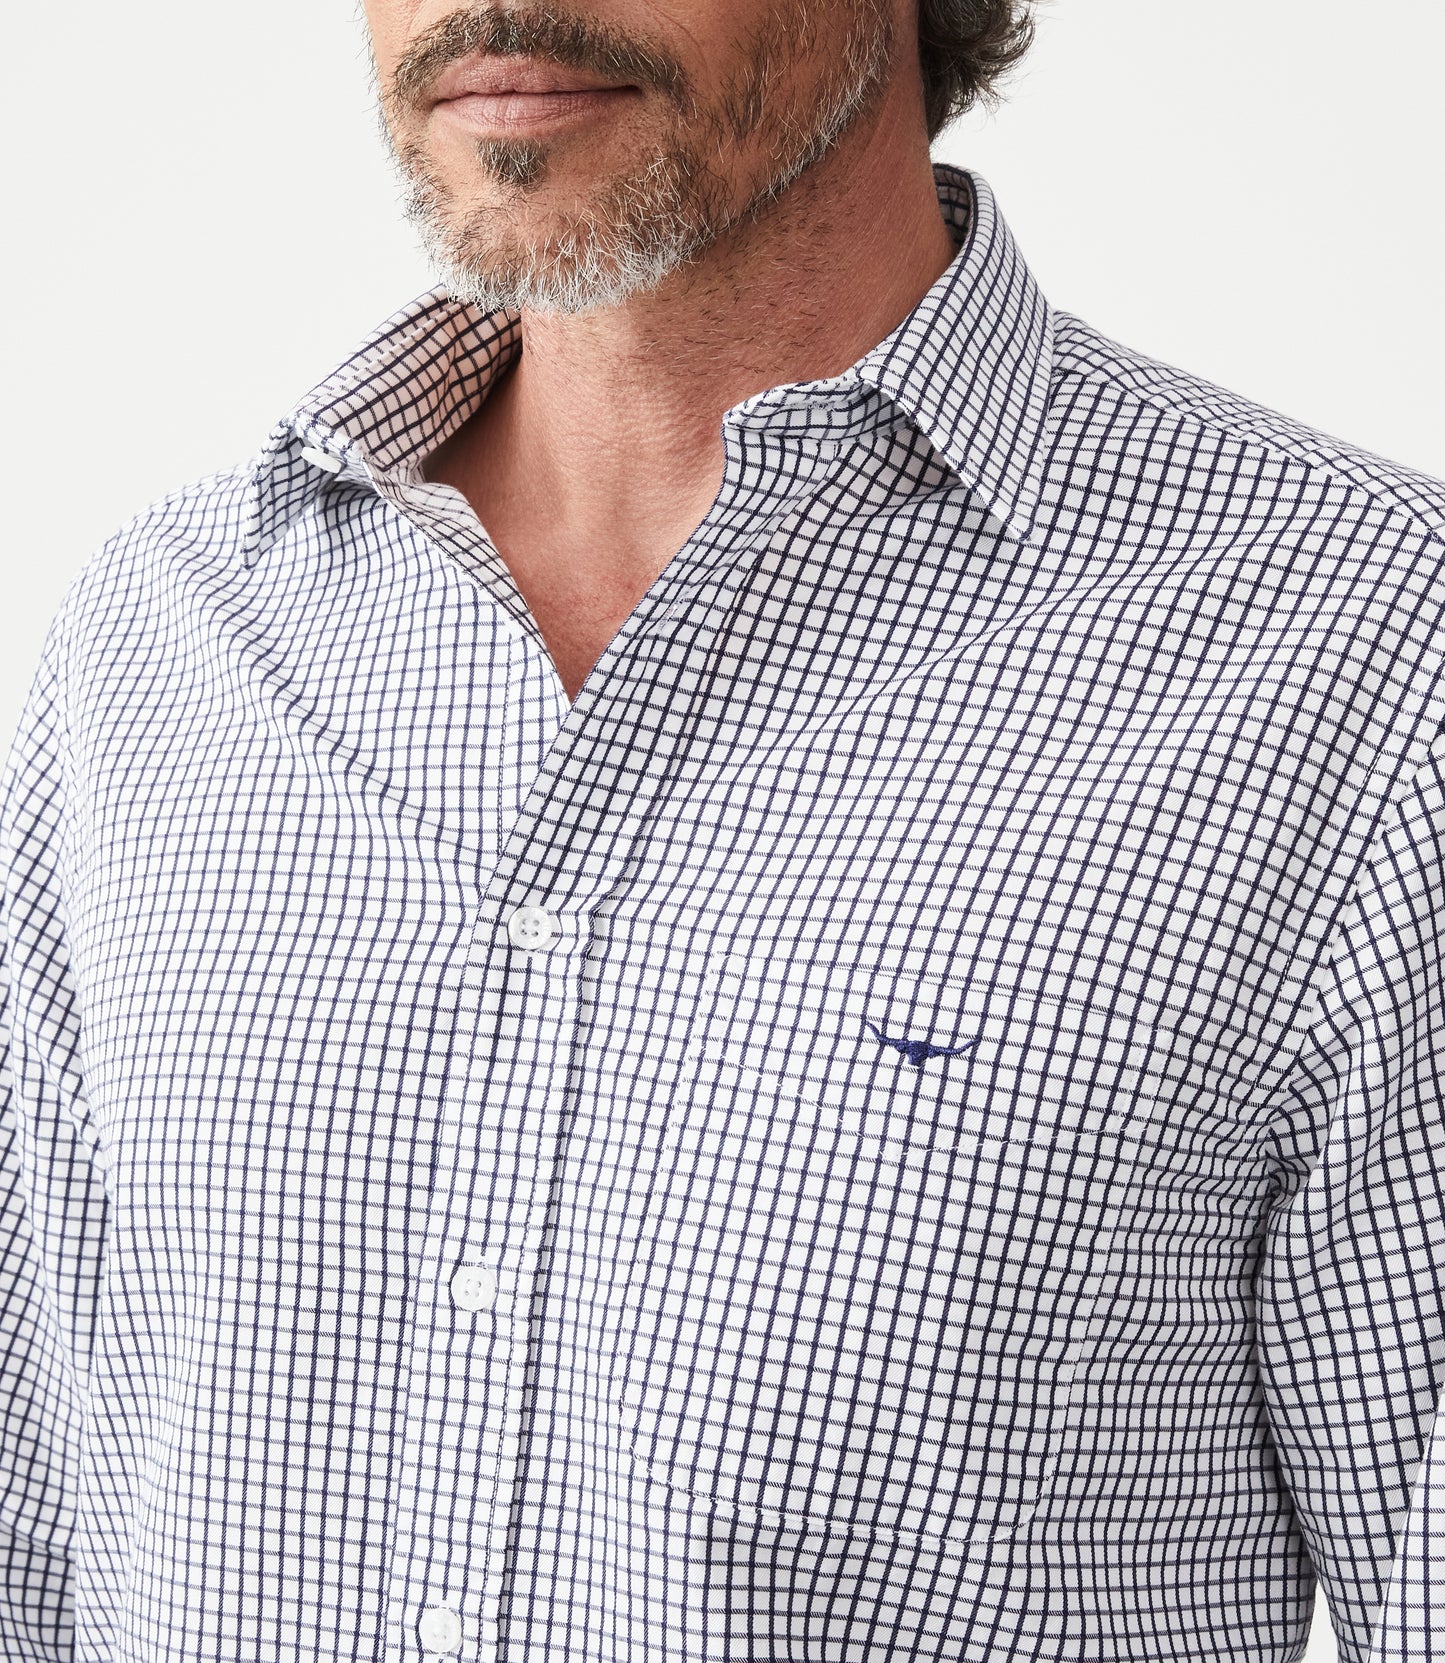 R.M Williams Shirts, The Collins Shirt in Navy/White